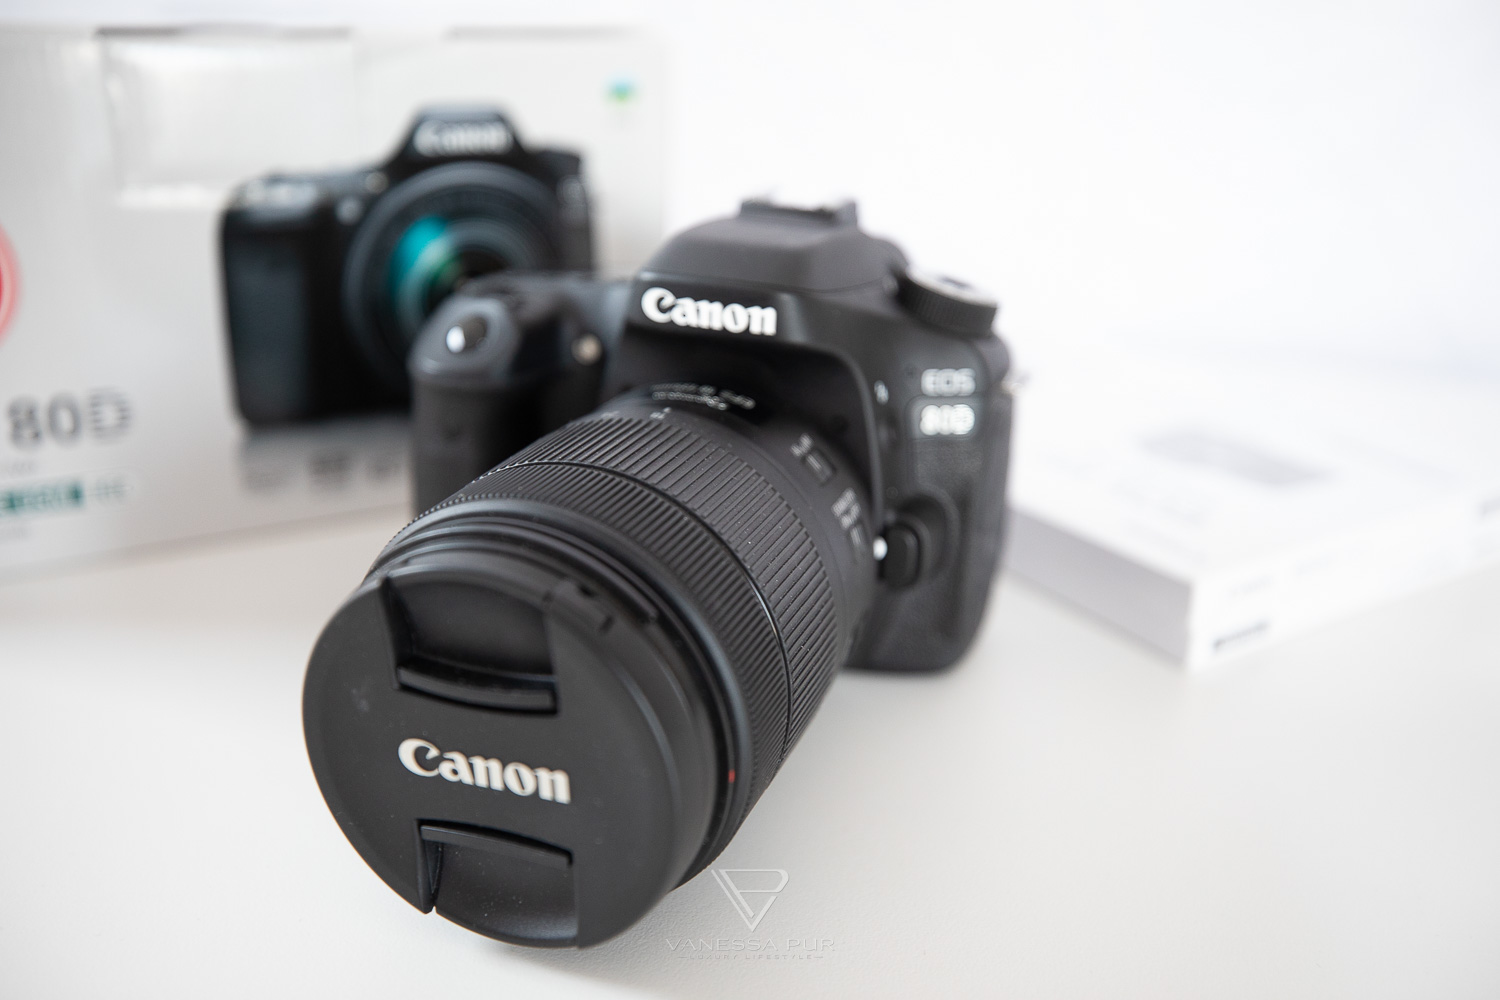 Canon 80D DSLR camera - new upper middle class from CANON - Canon EOS 80D - Camera - Lens 18-135mm IS USM - 3.5-5.6 -Product test - Tech blog - Photo blogger - Lifestyle blogger -24 megapixels - 60fps